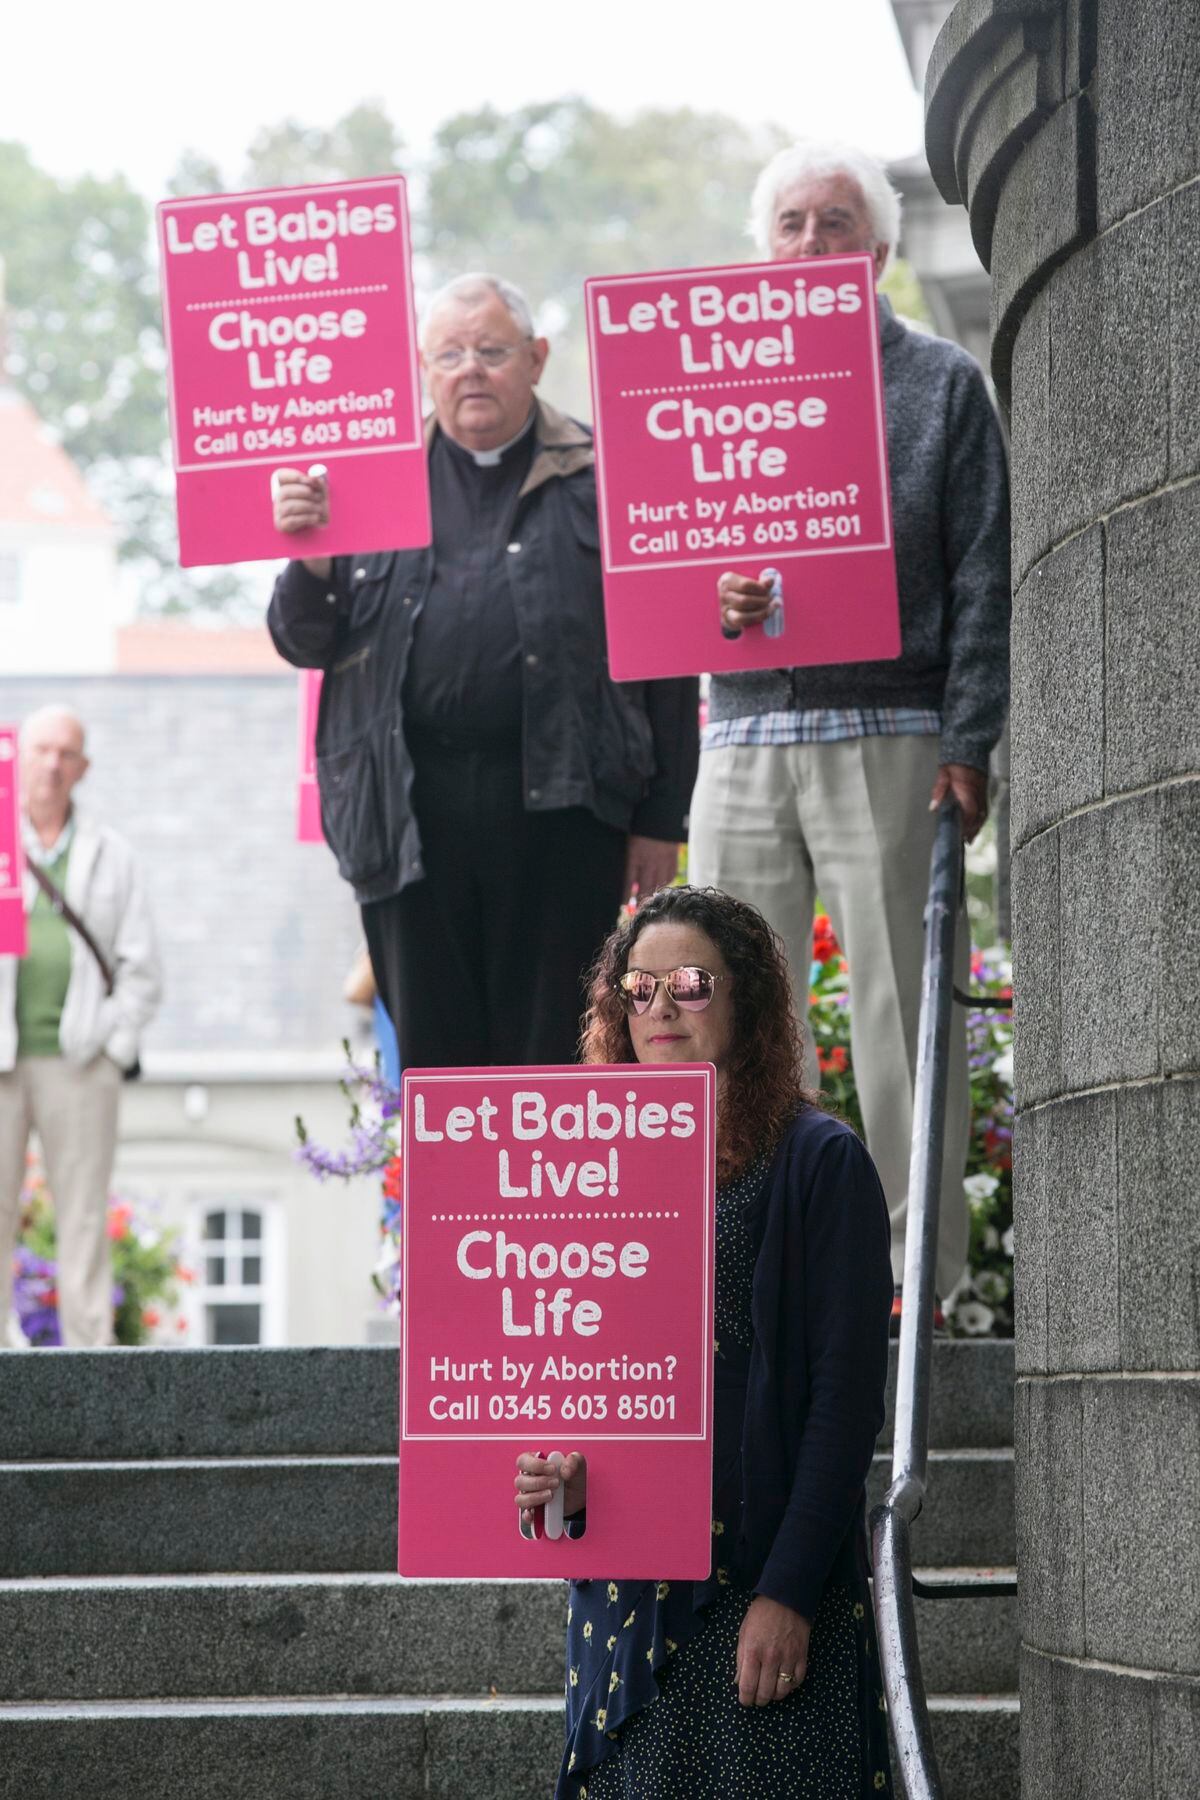 Pic by Adrian Miller 17-06-20 Royal Courts. Let Babies Live was the slogan at an Anti abortion protest held in silence.. (28374661)